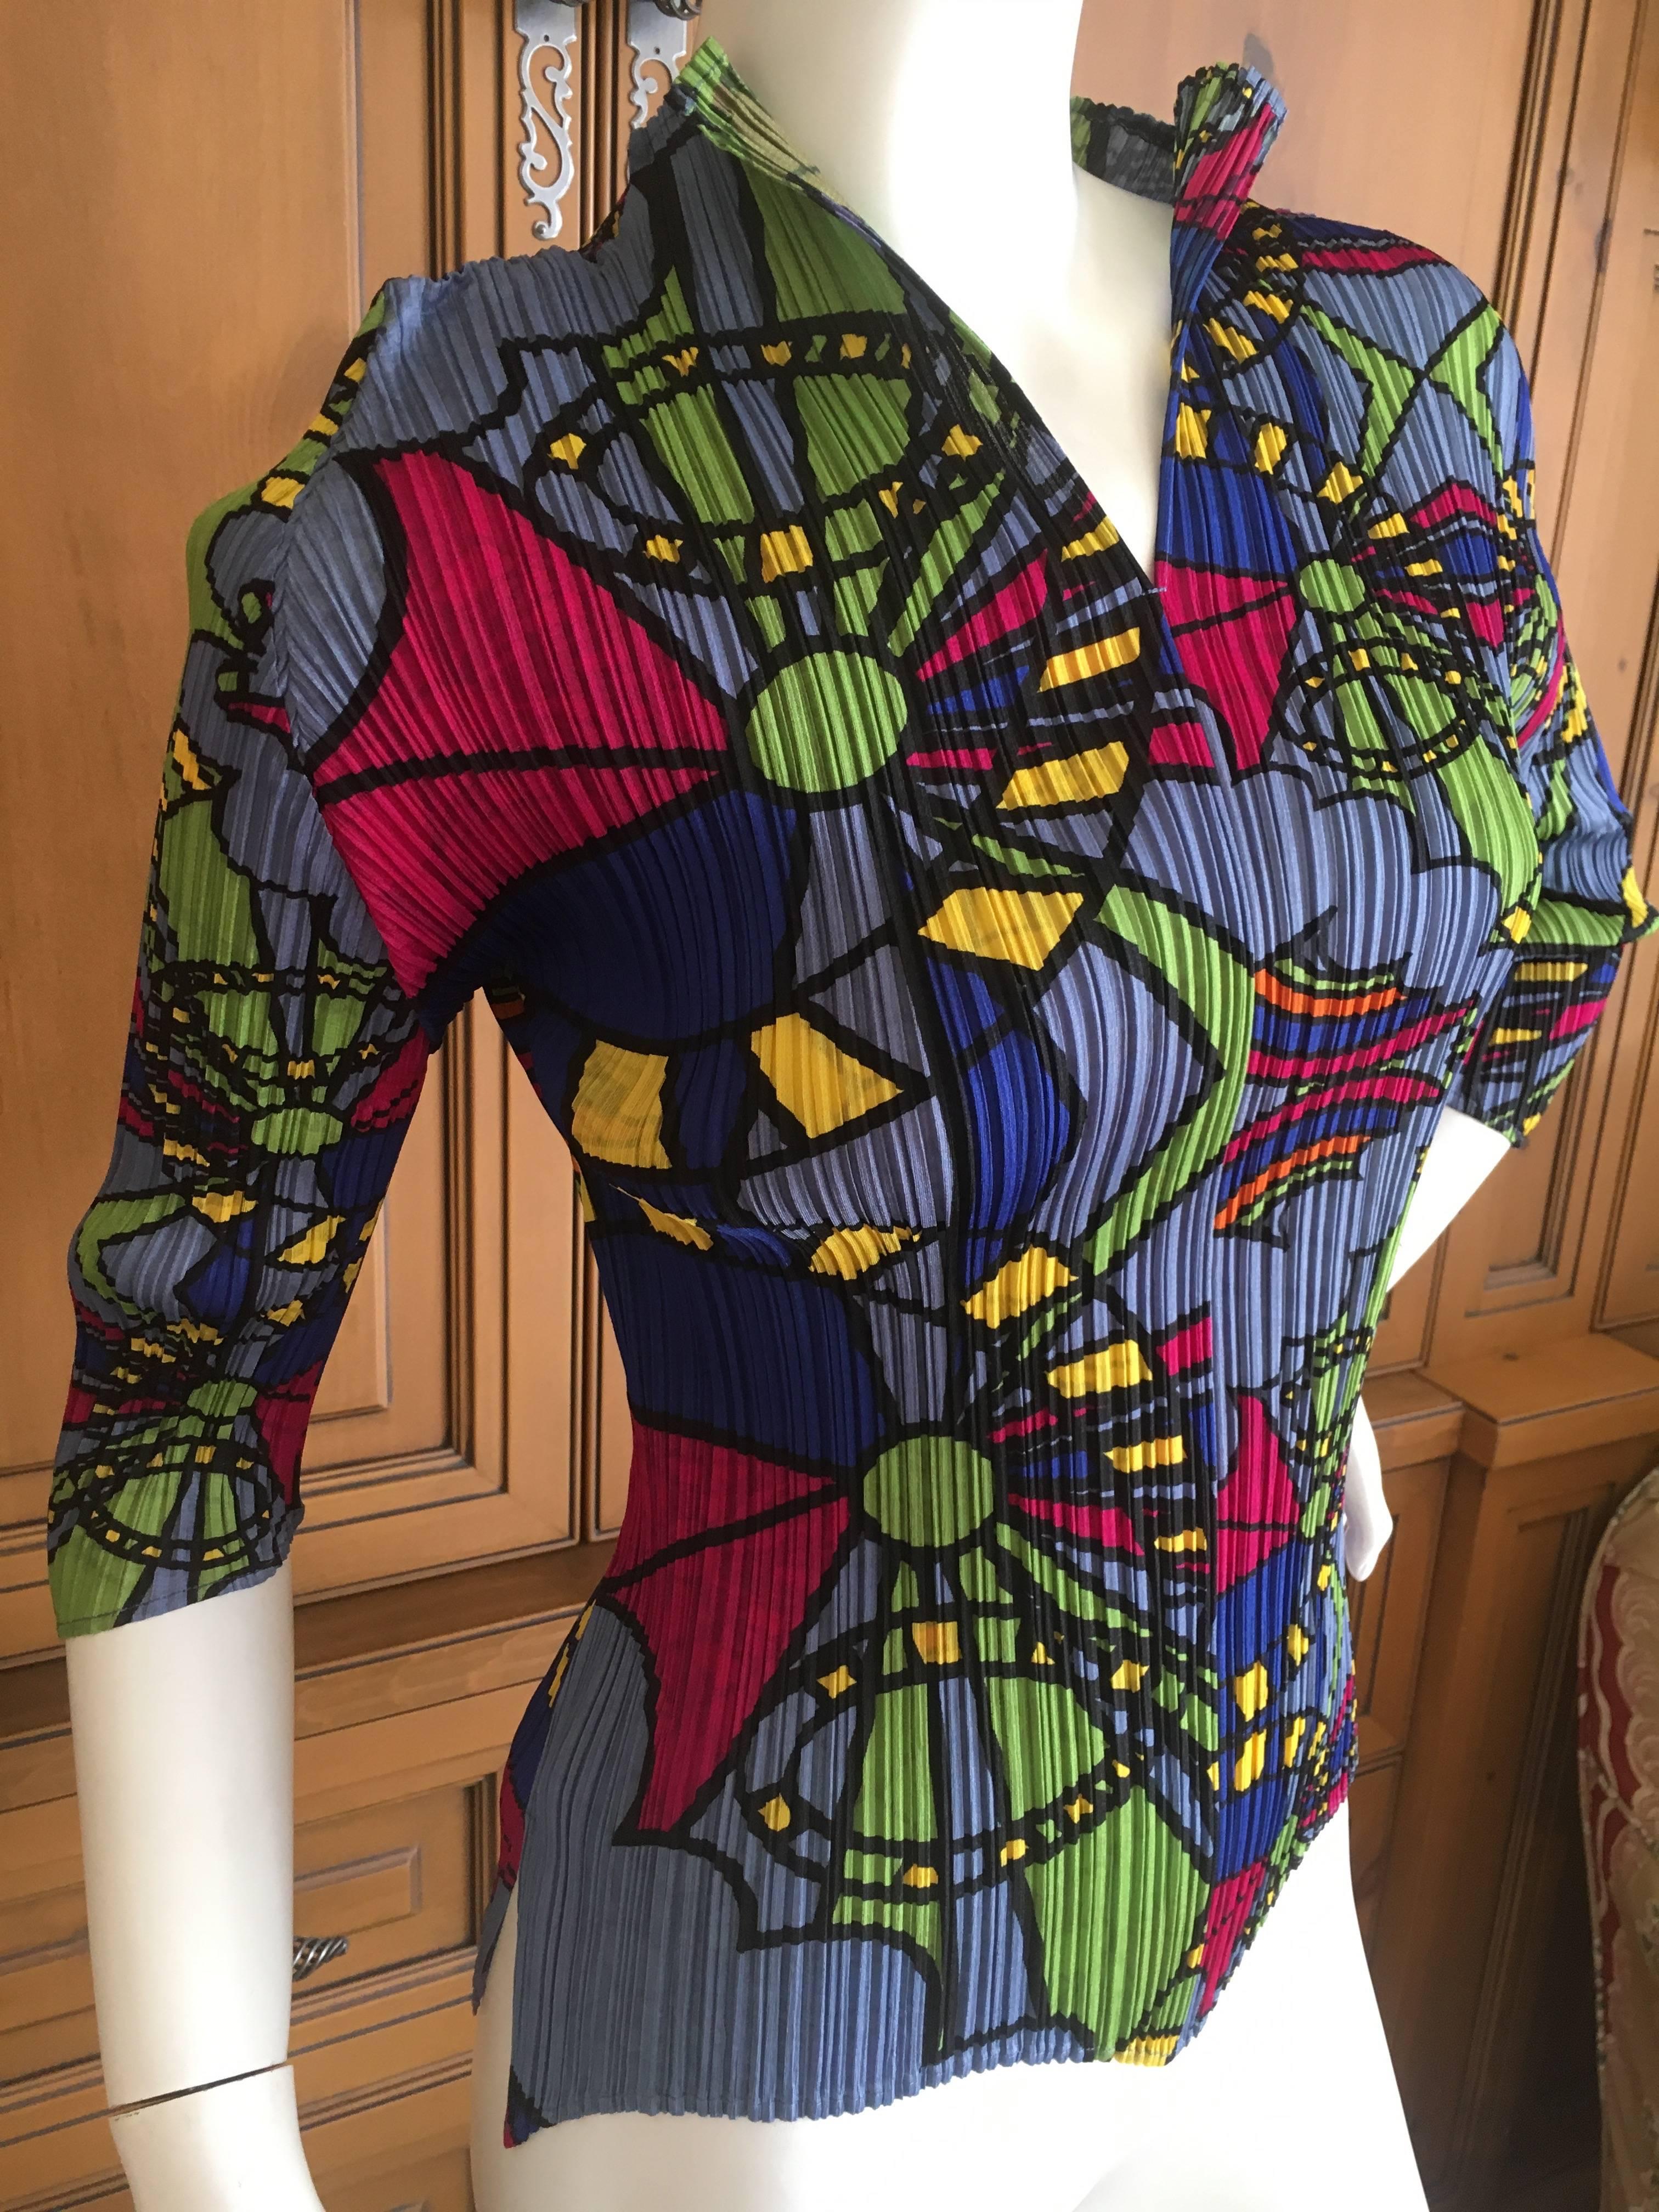 Issey Miyake Pleats Please 60's Inspired Colorful Top
SO Peter Max
There is a lot of stretch.
Bust 38"
Length 24"
Excellent condition